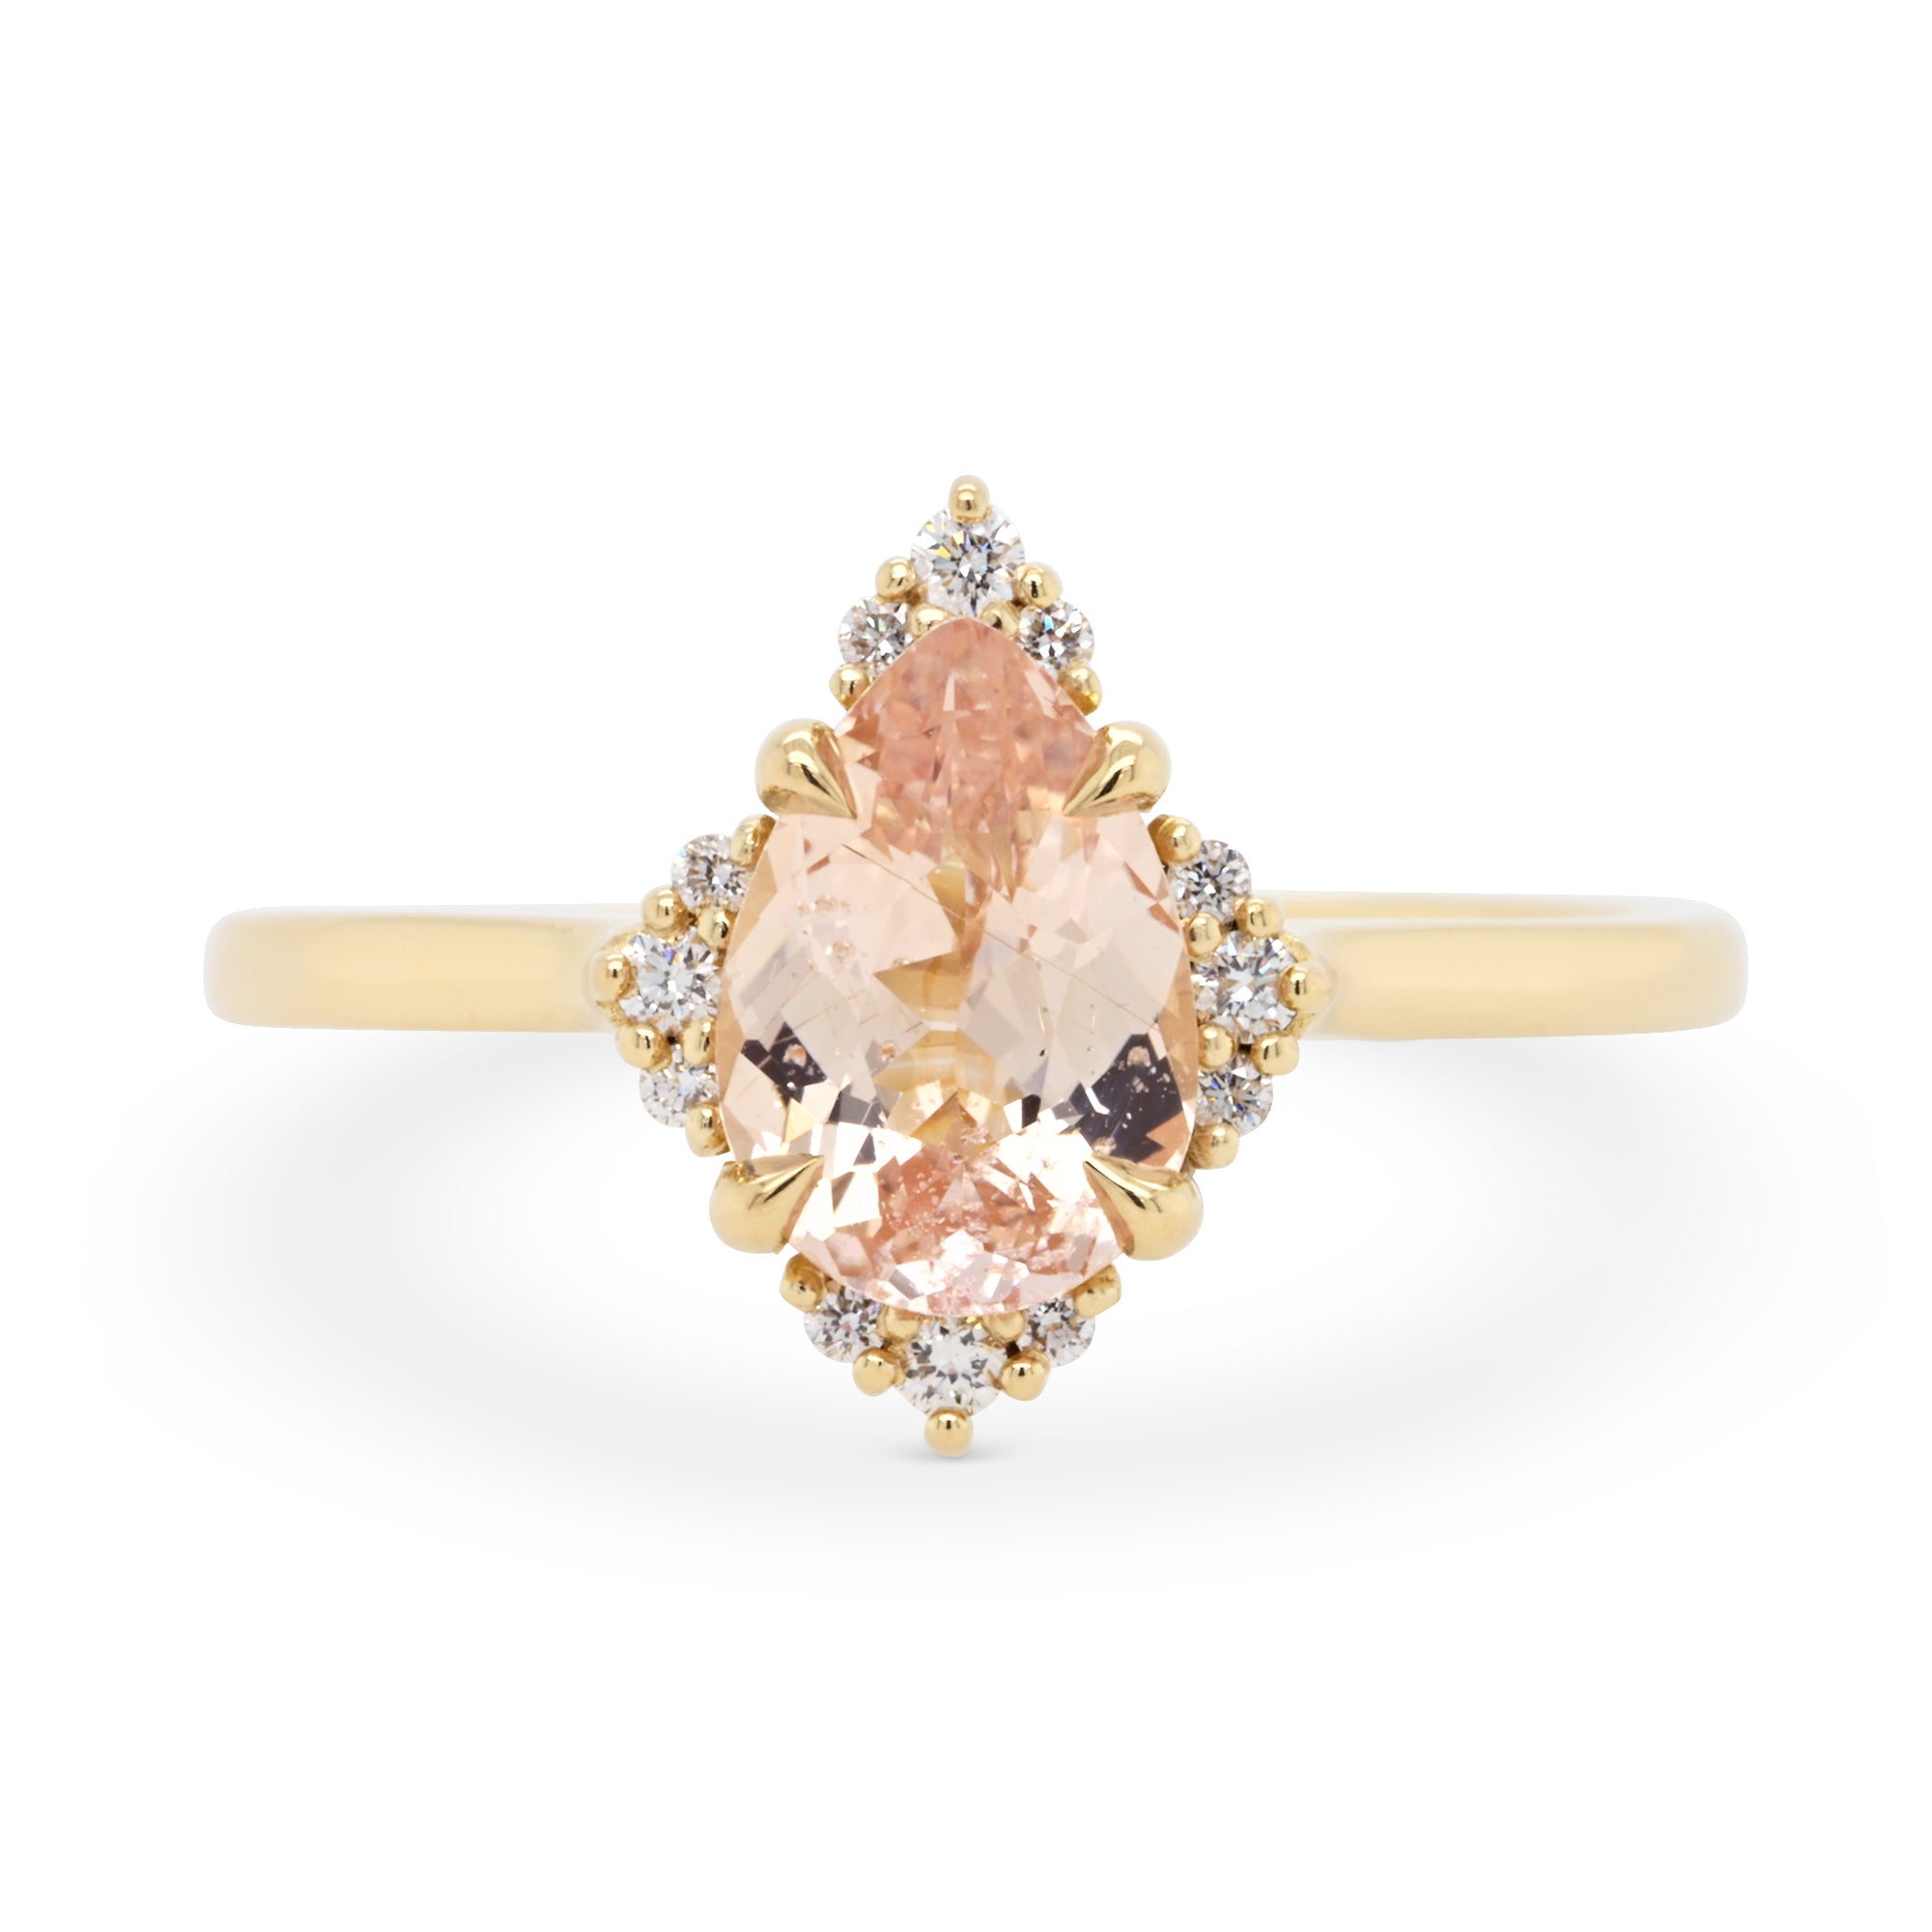 Peach colored pear shaped sapphire engagement ring with a 14k yellow gold diamond halo setting